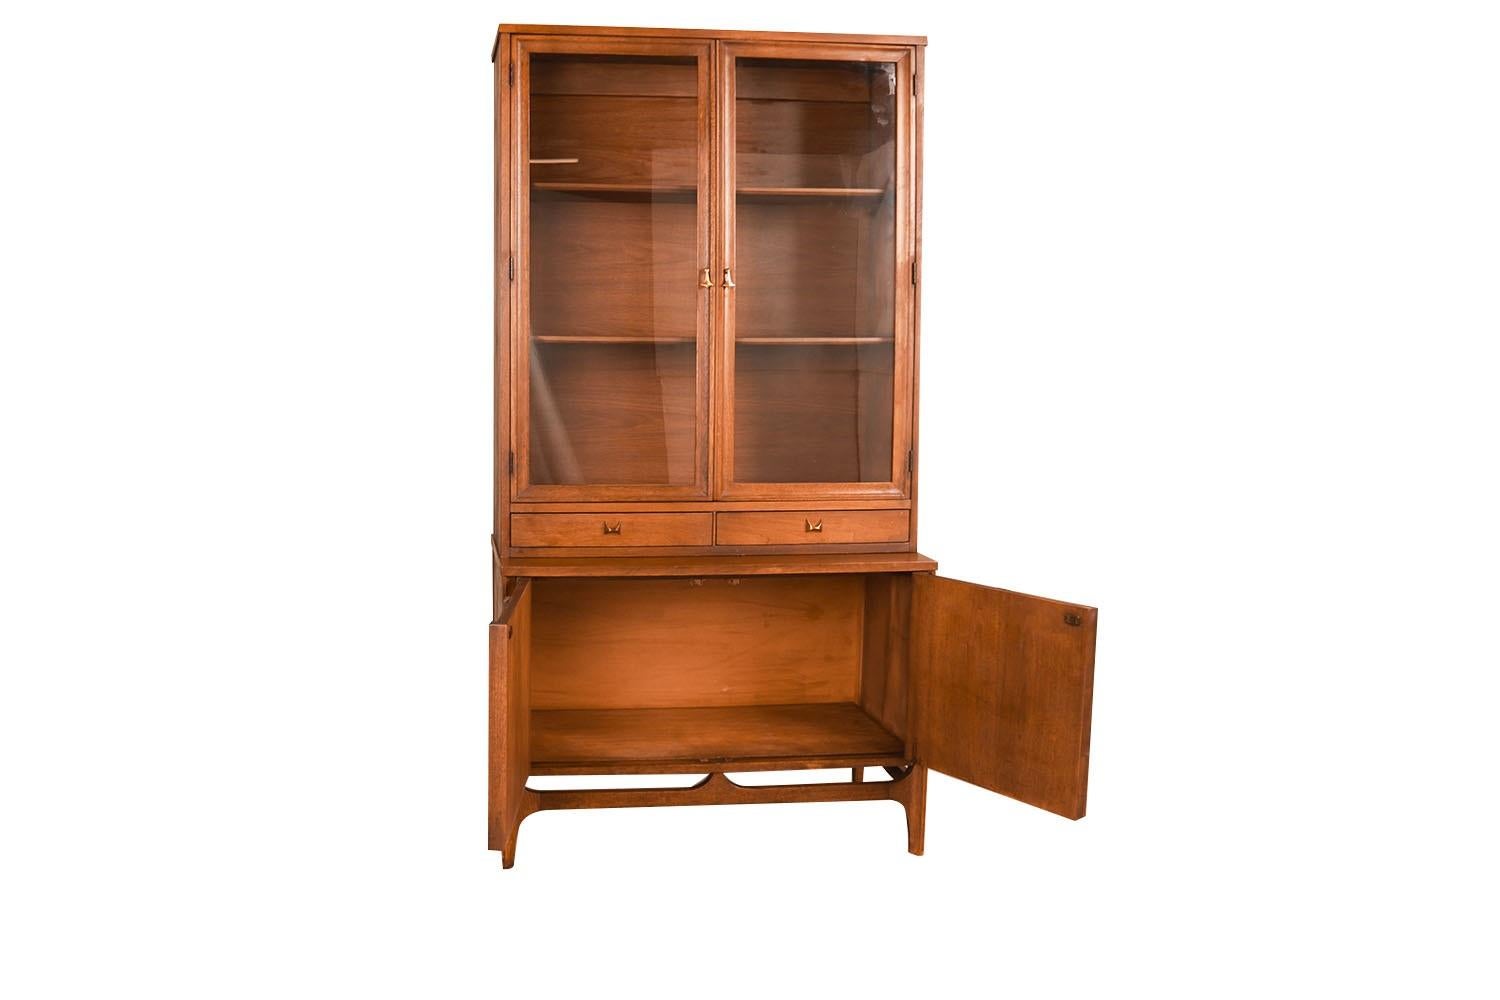 Beautiful, retro Mid-Century Modern detailed proportioned walnut Broyhill Brasilia buffet China cabinet with detachable hutch in great original condition. Hutch top lifts off the lower cabinet. The upper portion features a cabinet with convenient